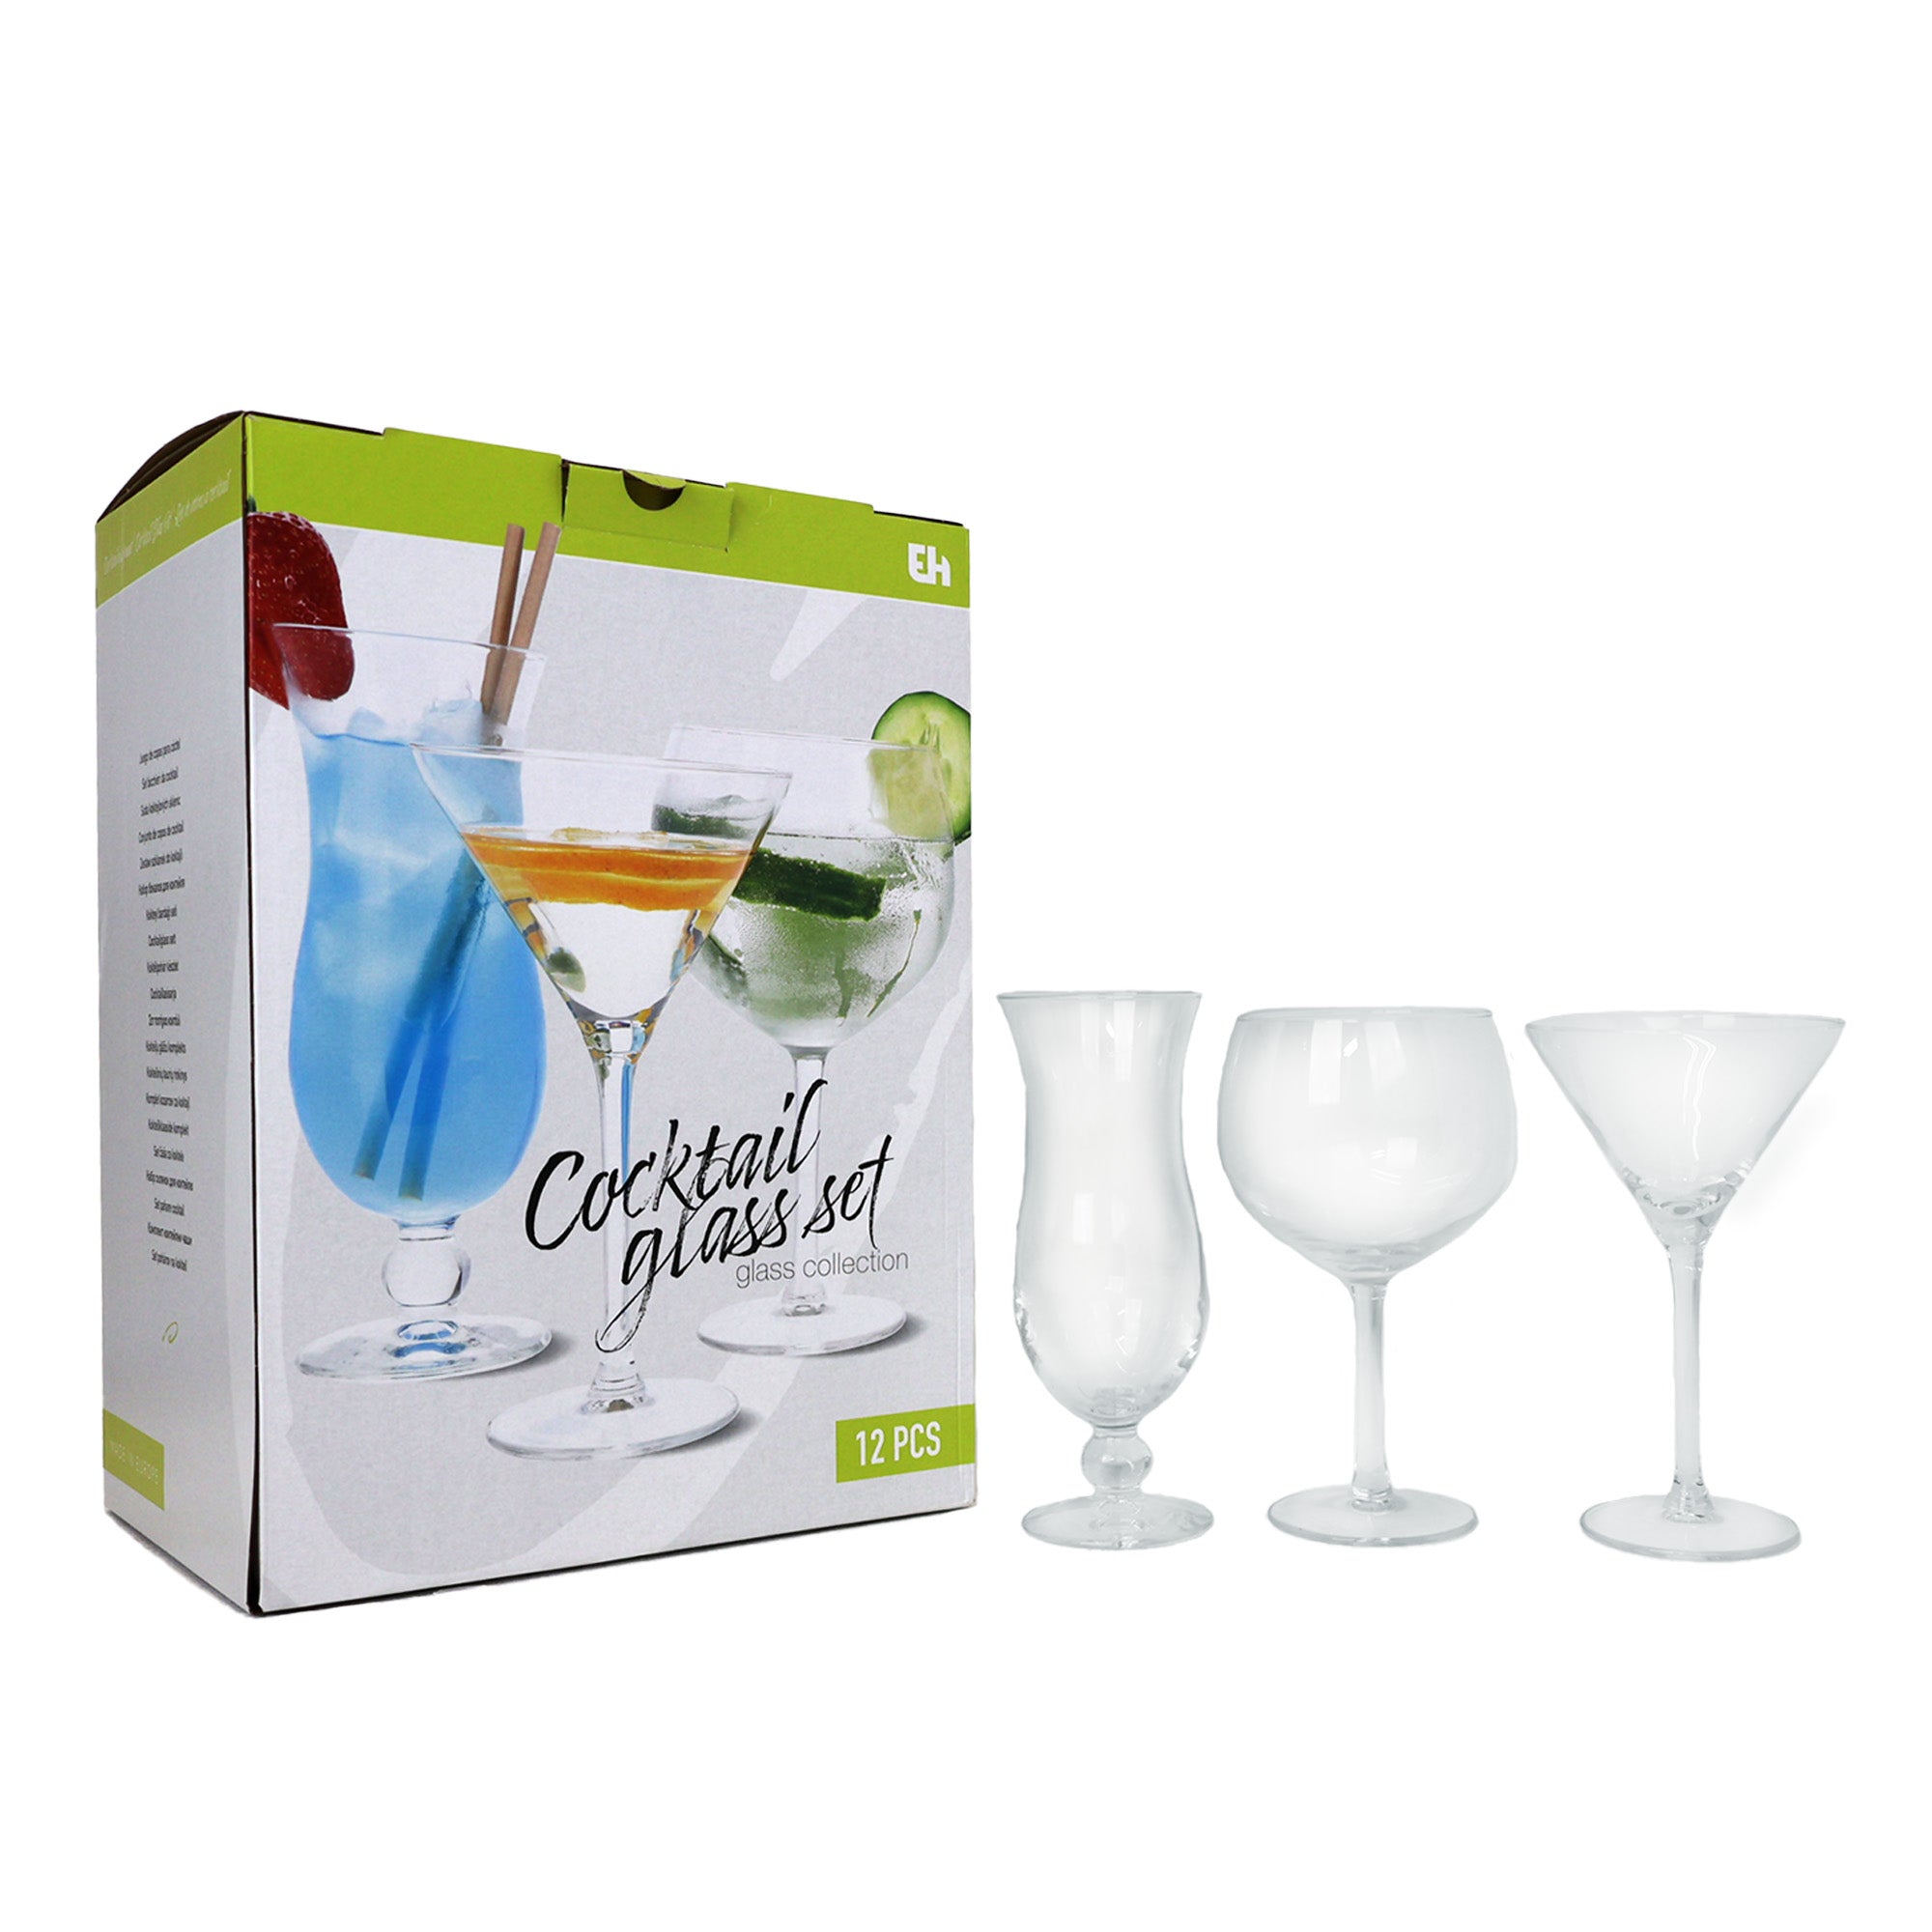 Cocktail Glasses Set of 12 Pieces - Martini, Gin & Tonic, Hurricane